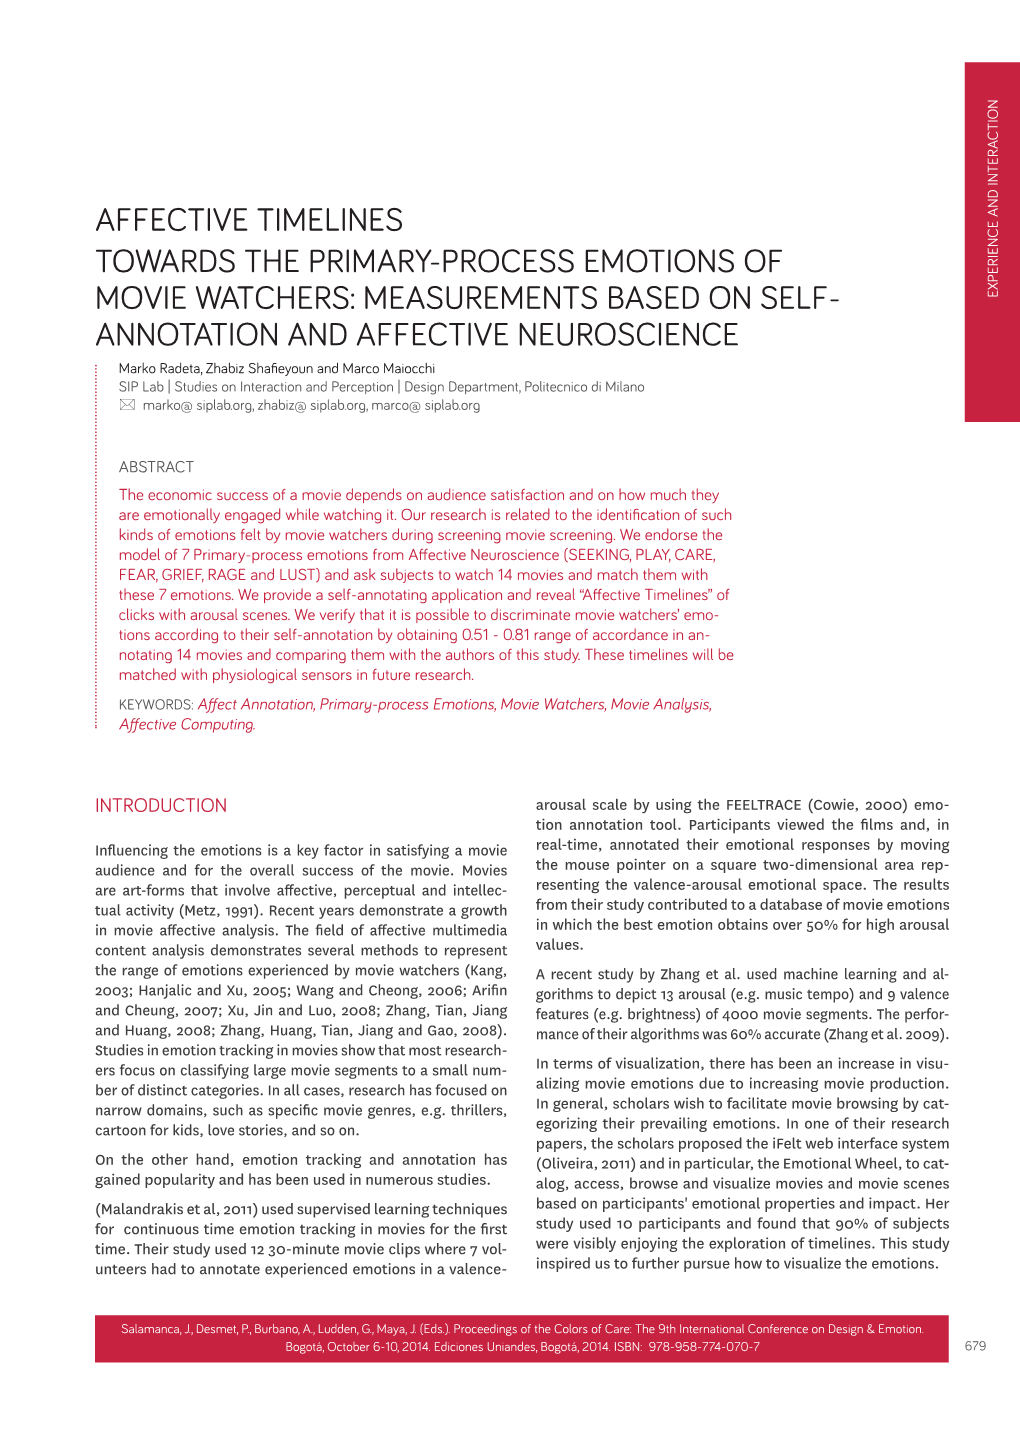 Affective Timelines Towards the Primary-Process Emotions Of